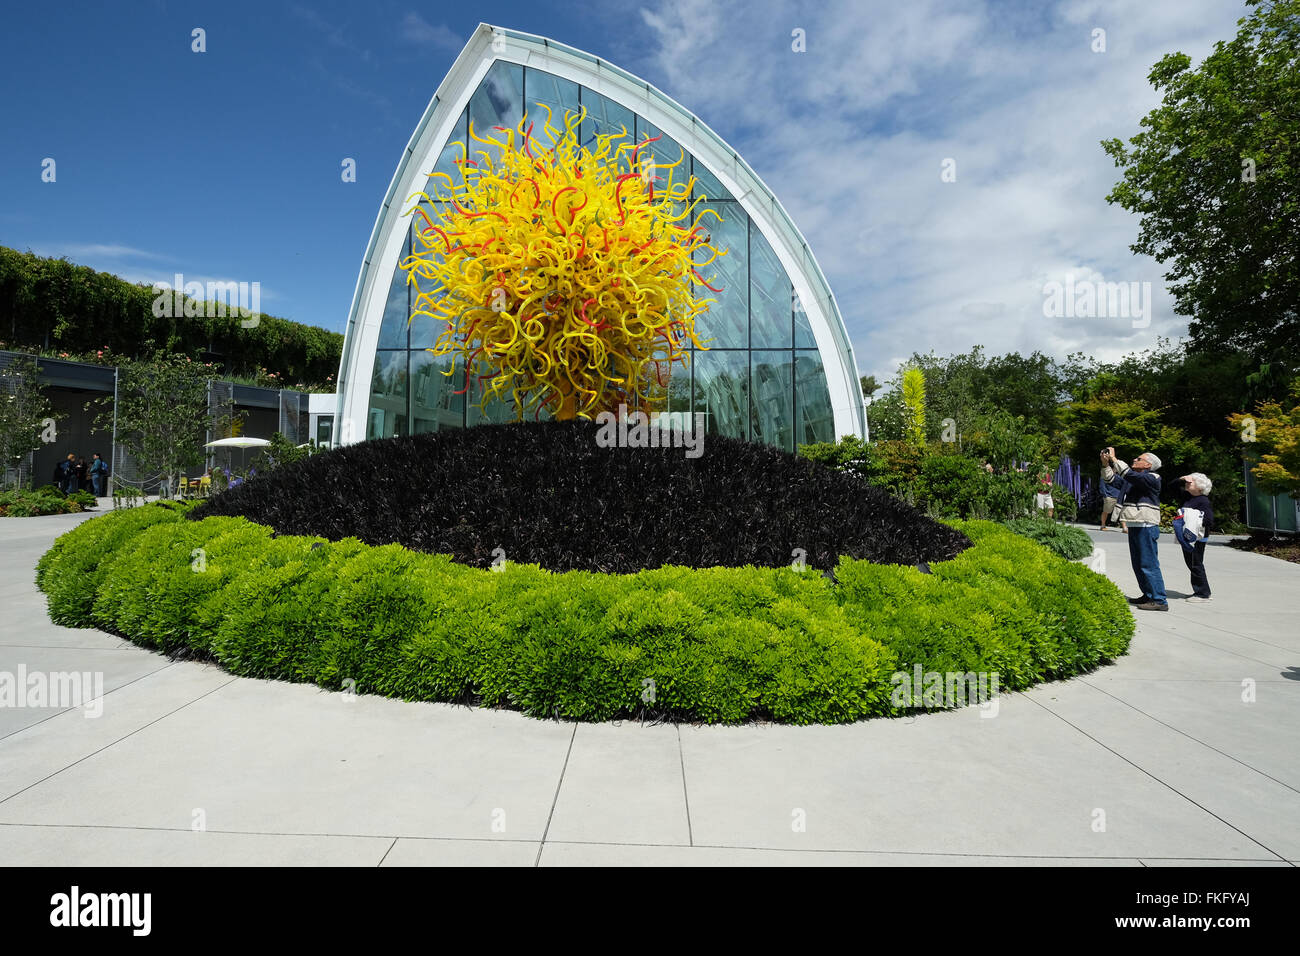 Chihuly Garden and Glass, a museum in Seattle, Washington, showcases the glass art of Dale Chihuly. Stock Photo